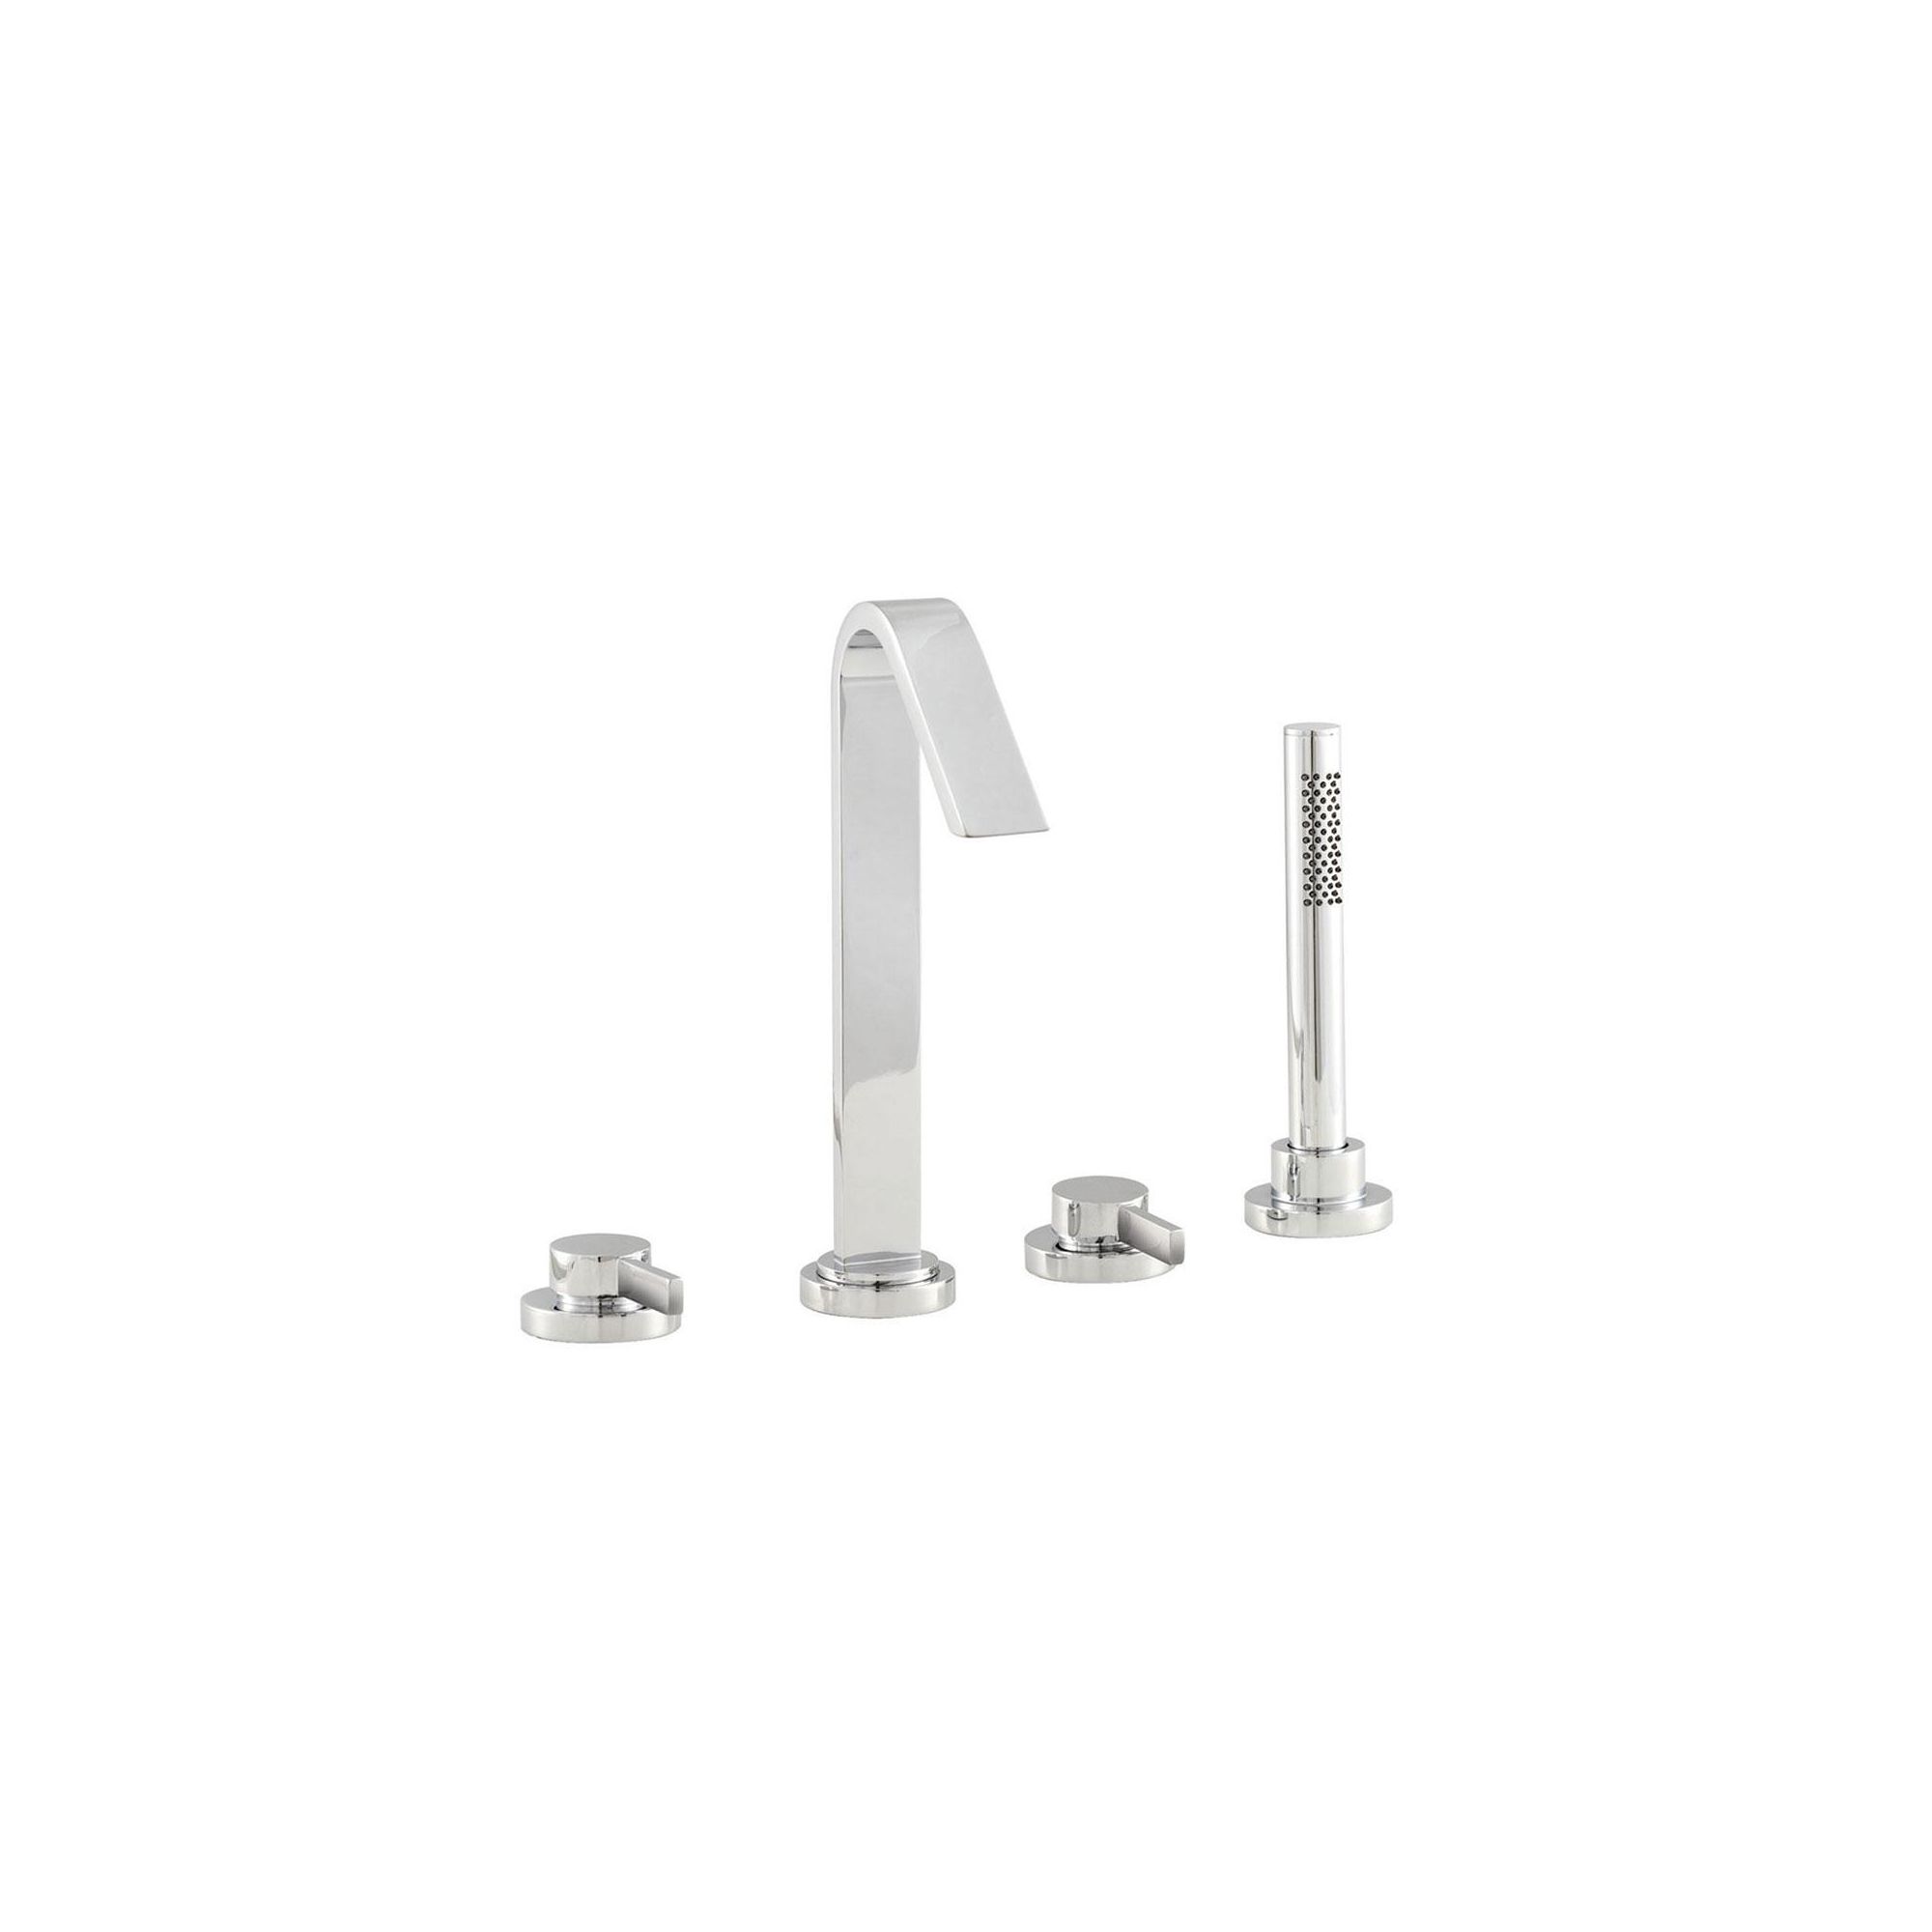 Hudson Reed Clio 4 Tap Hole Bath Shower Mixer Tap with Swivel Spout and Shower Kit at Tesco Direct